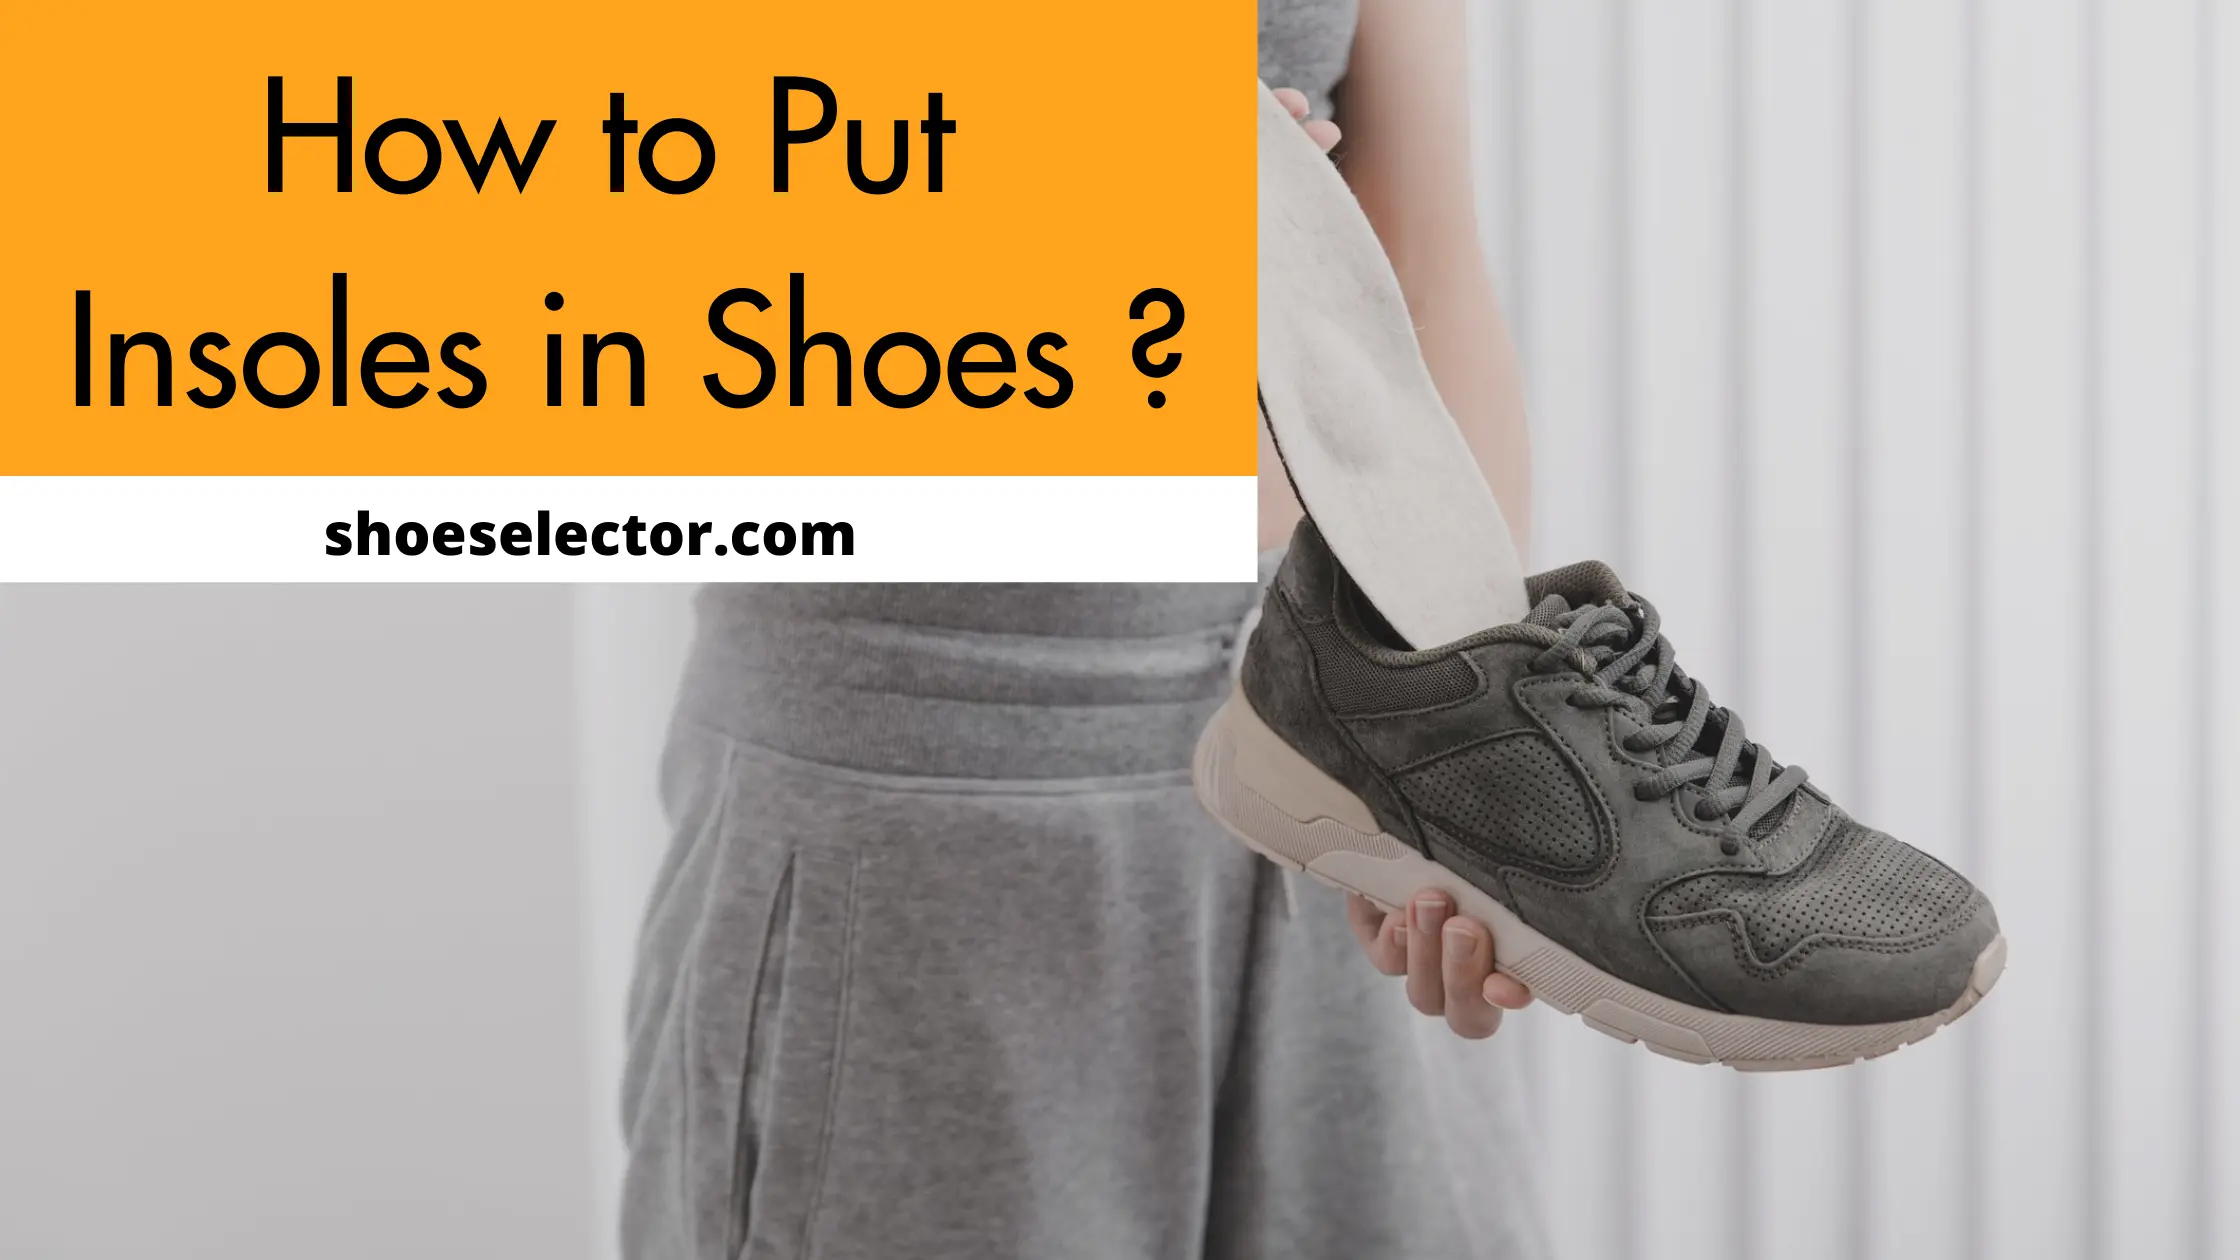 How To Put Insoles In Shoes? - Unique Guide